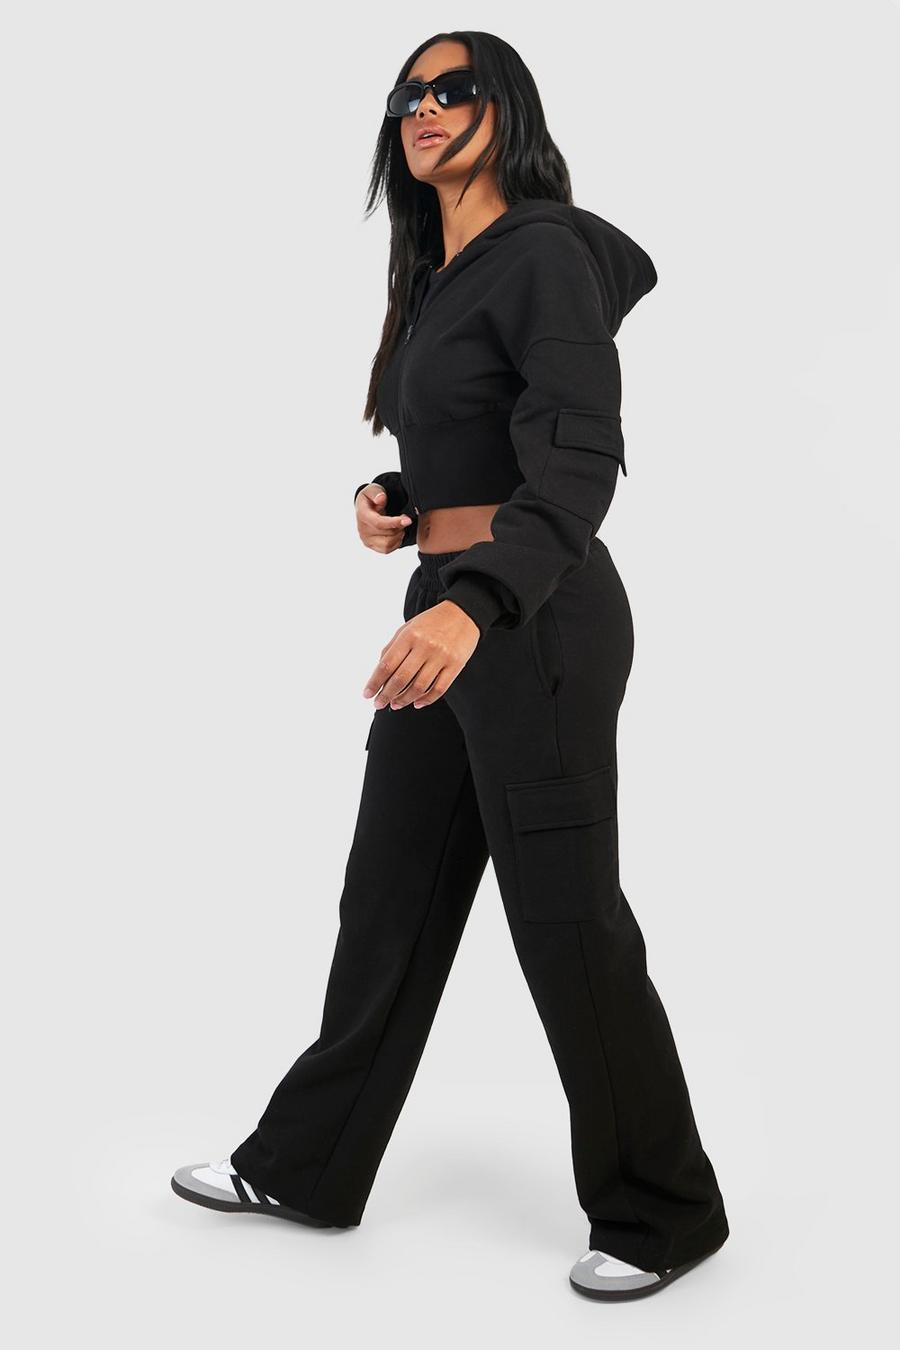 Taking Over Sweatpants - Black  Cropped hoodie outfit, Fashion